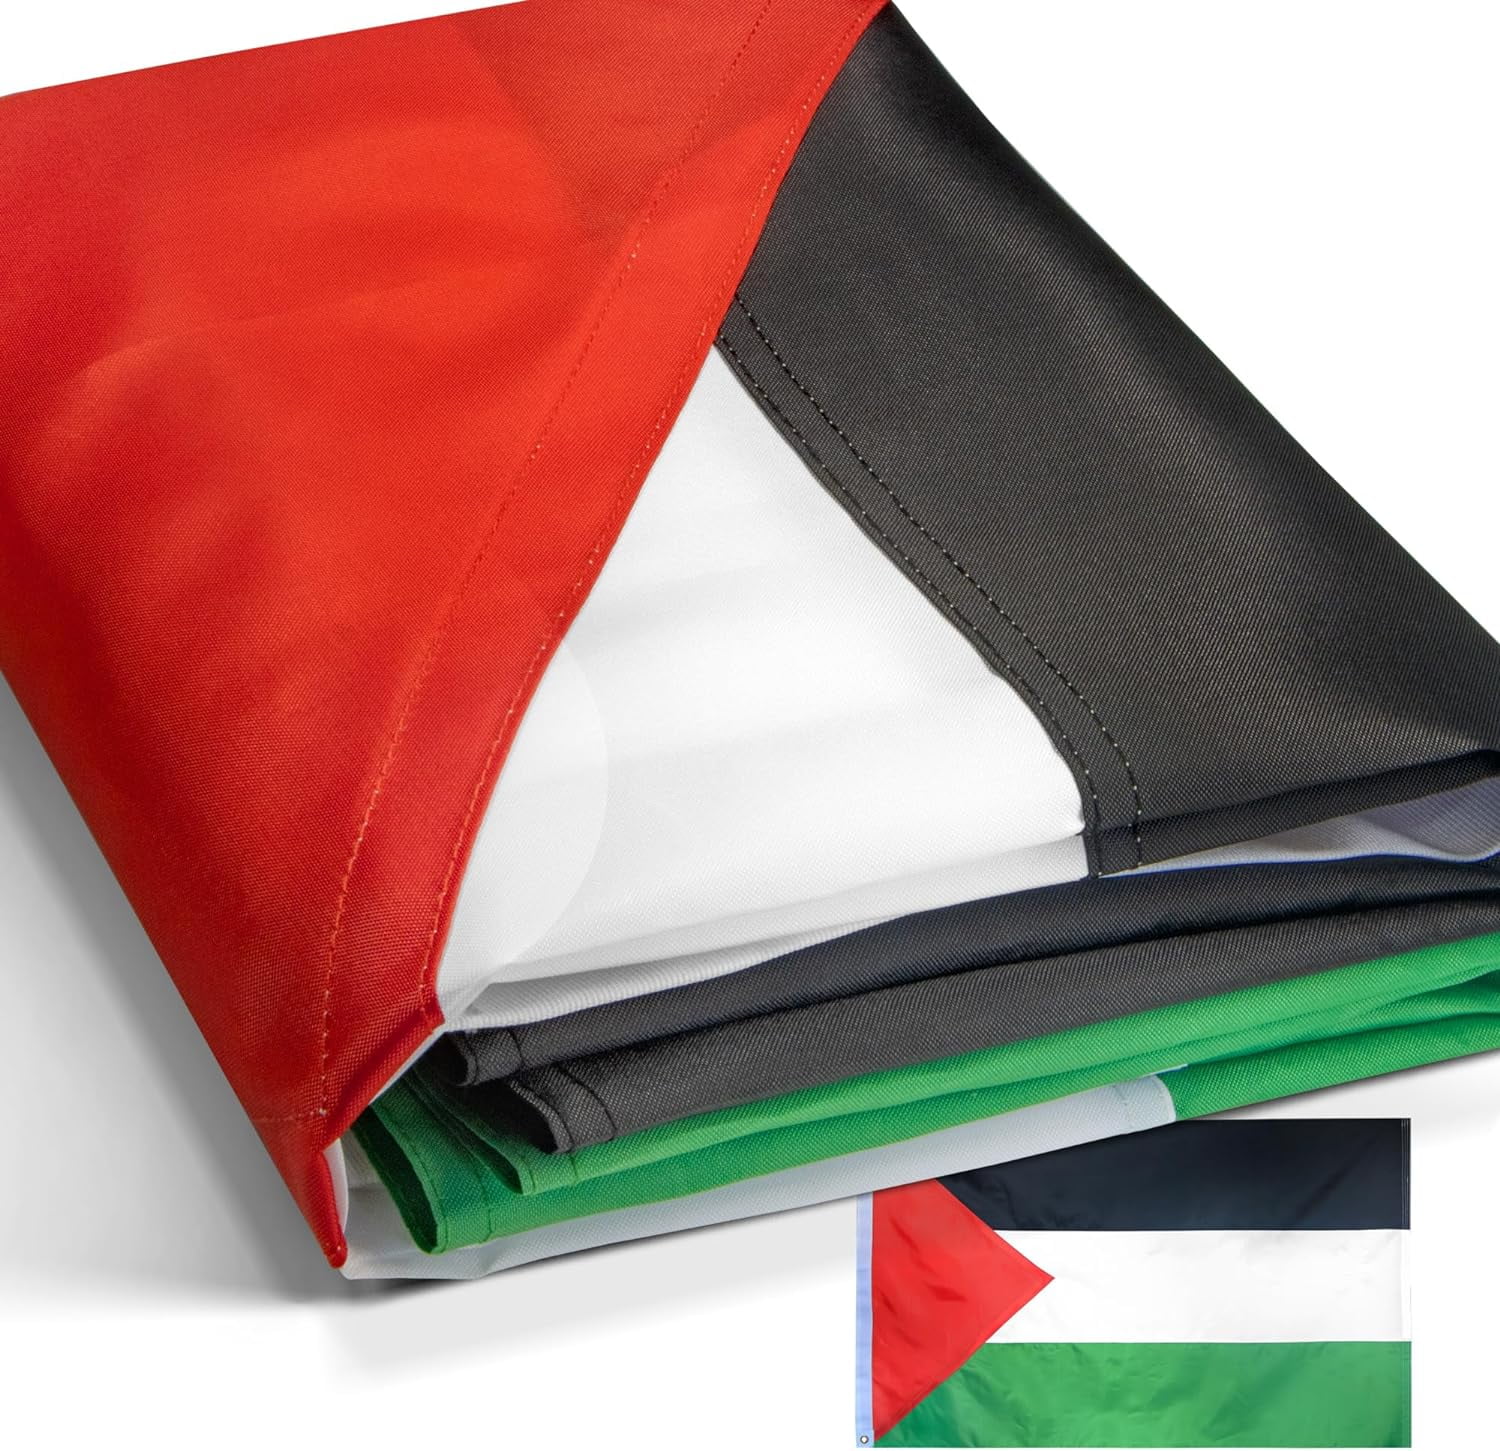 DMSE Palestine Palestinian National Flag 3X5 Ft Foot 100% Polyester 100D  Flag UV Resistant (3'X5' Ft Foot)